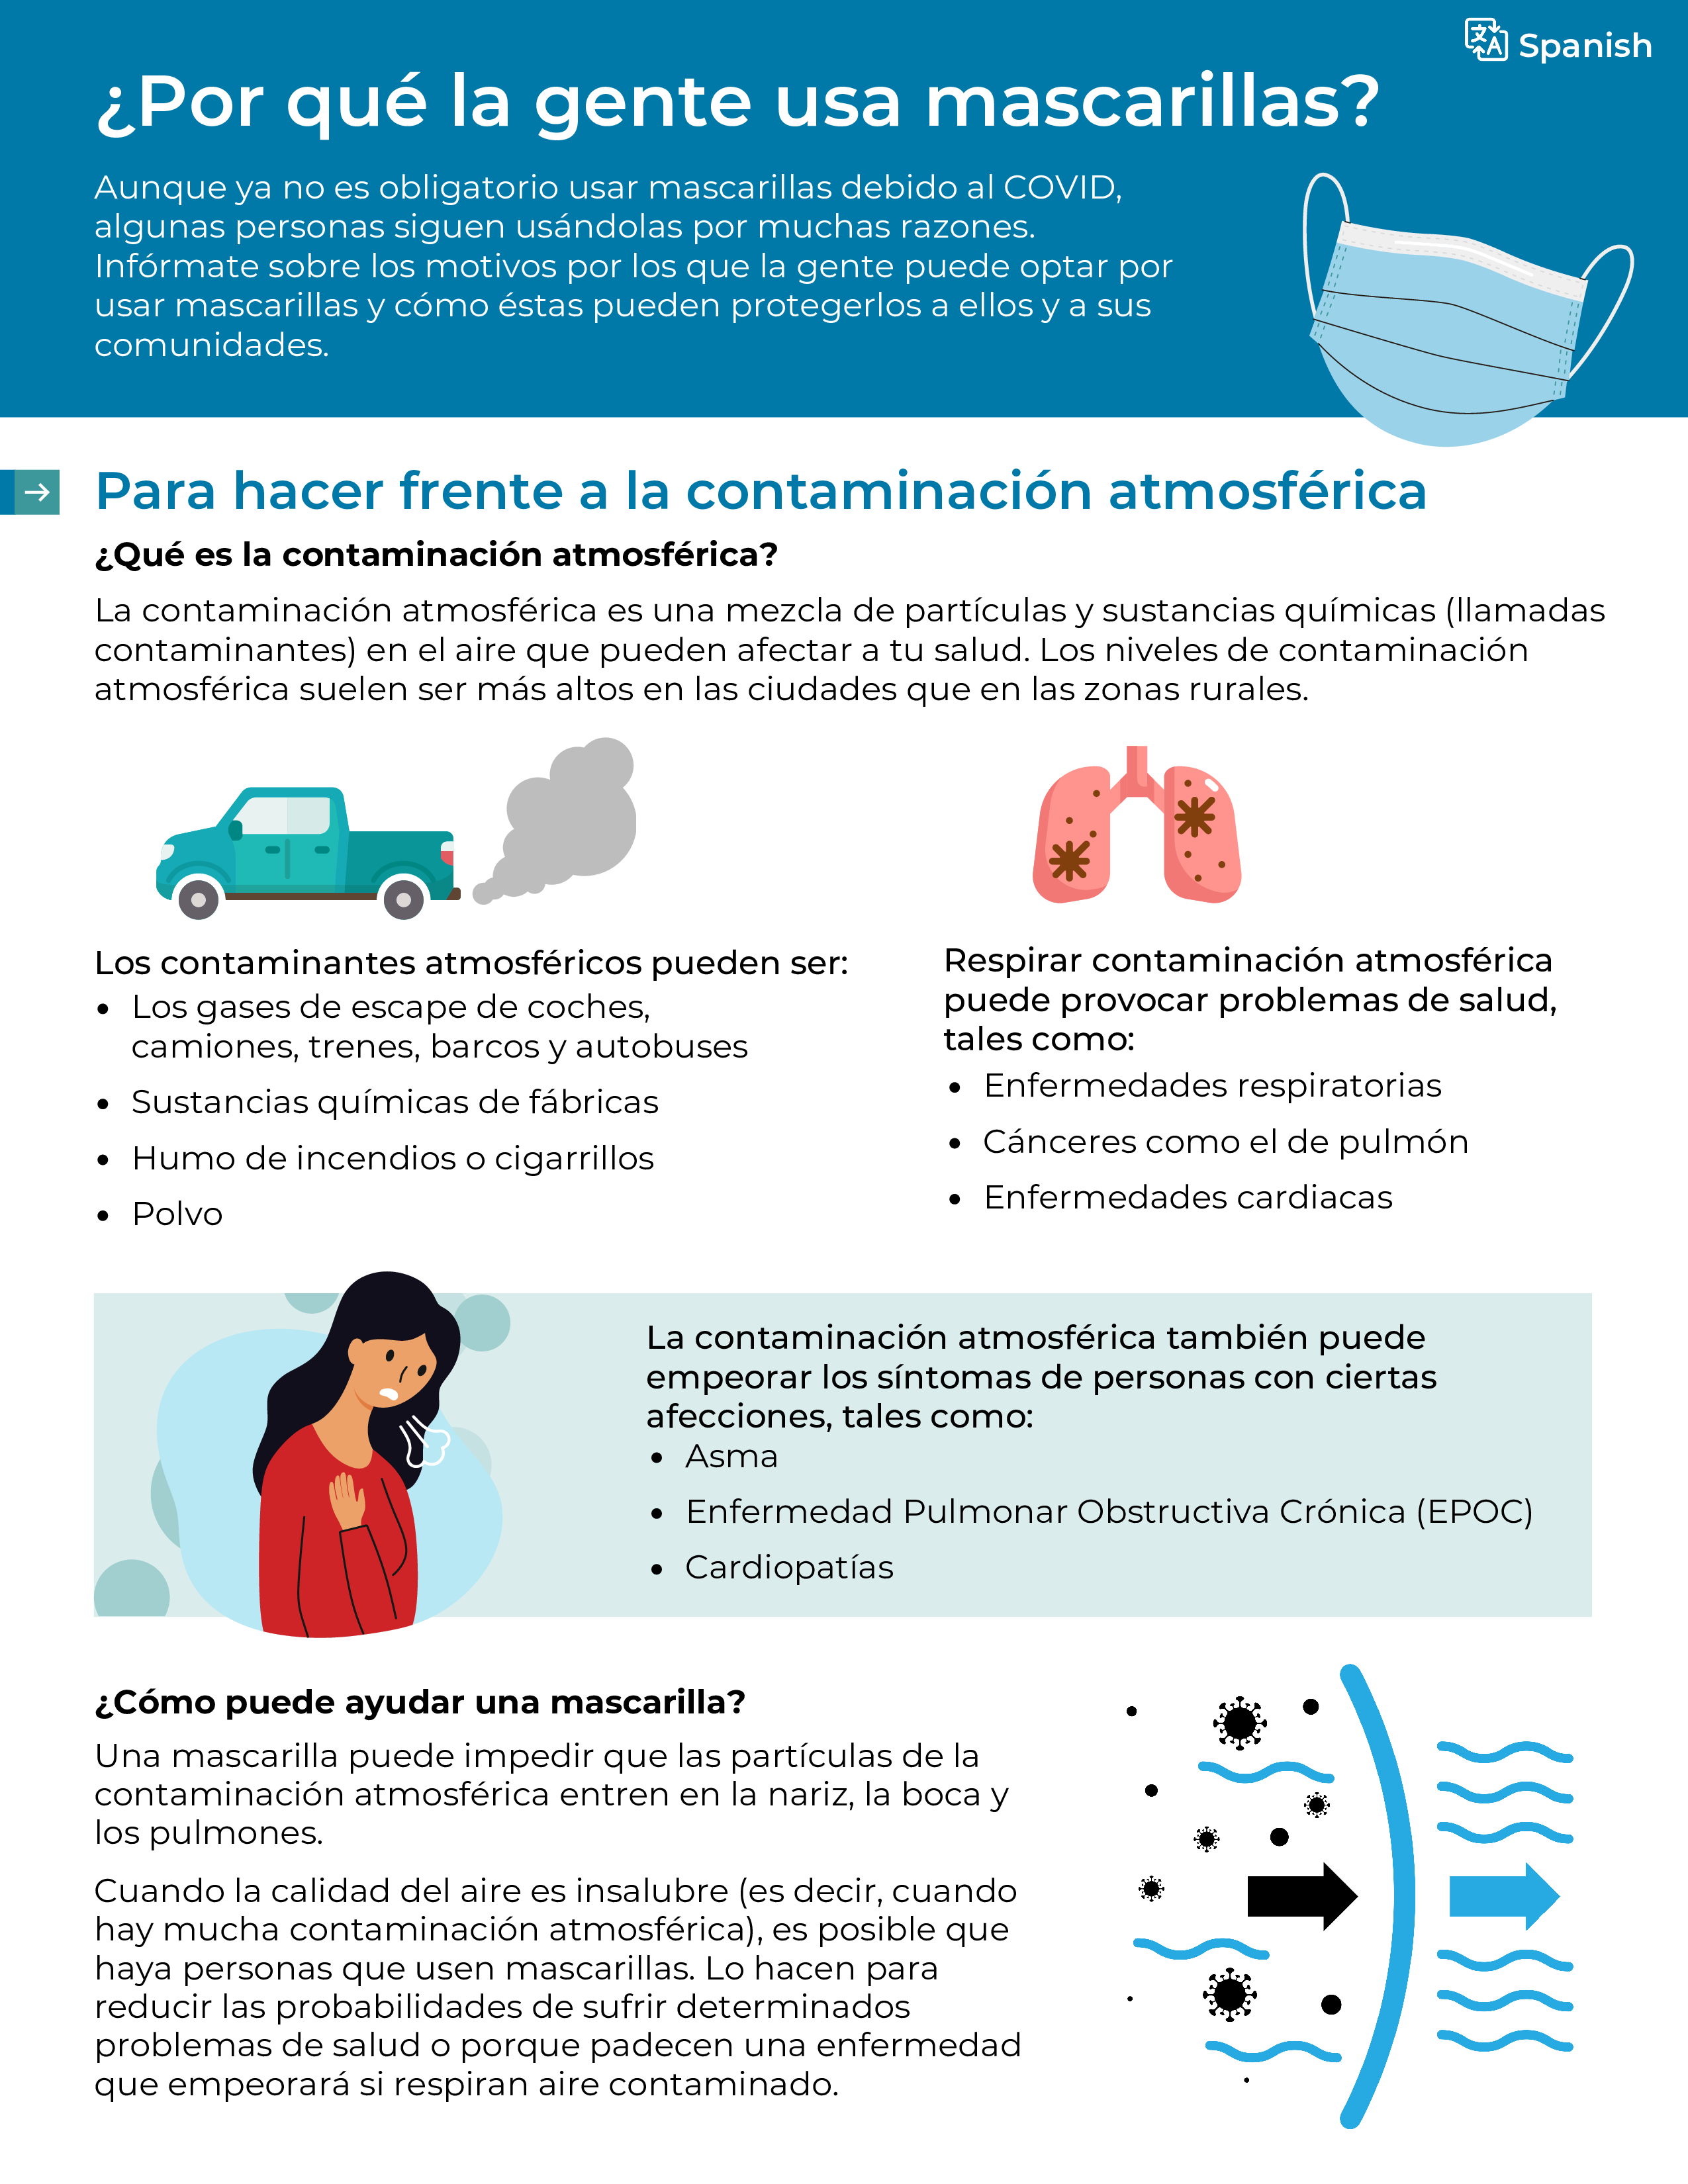 Factsheet displays cartoon images of a truck emitting exhaust, diseased lunges and a woman coughing alongside text explaining how masks can help you cope with air pollution.